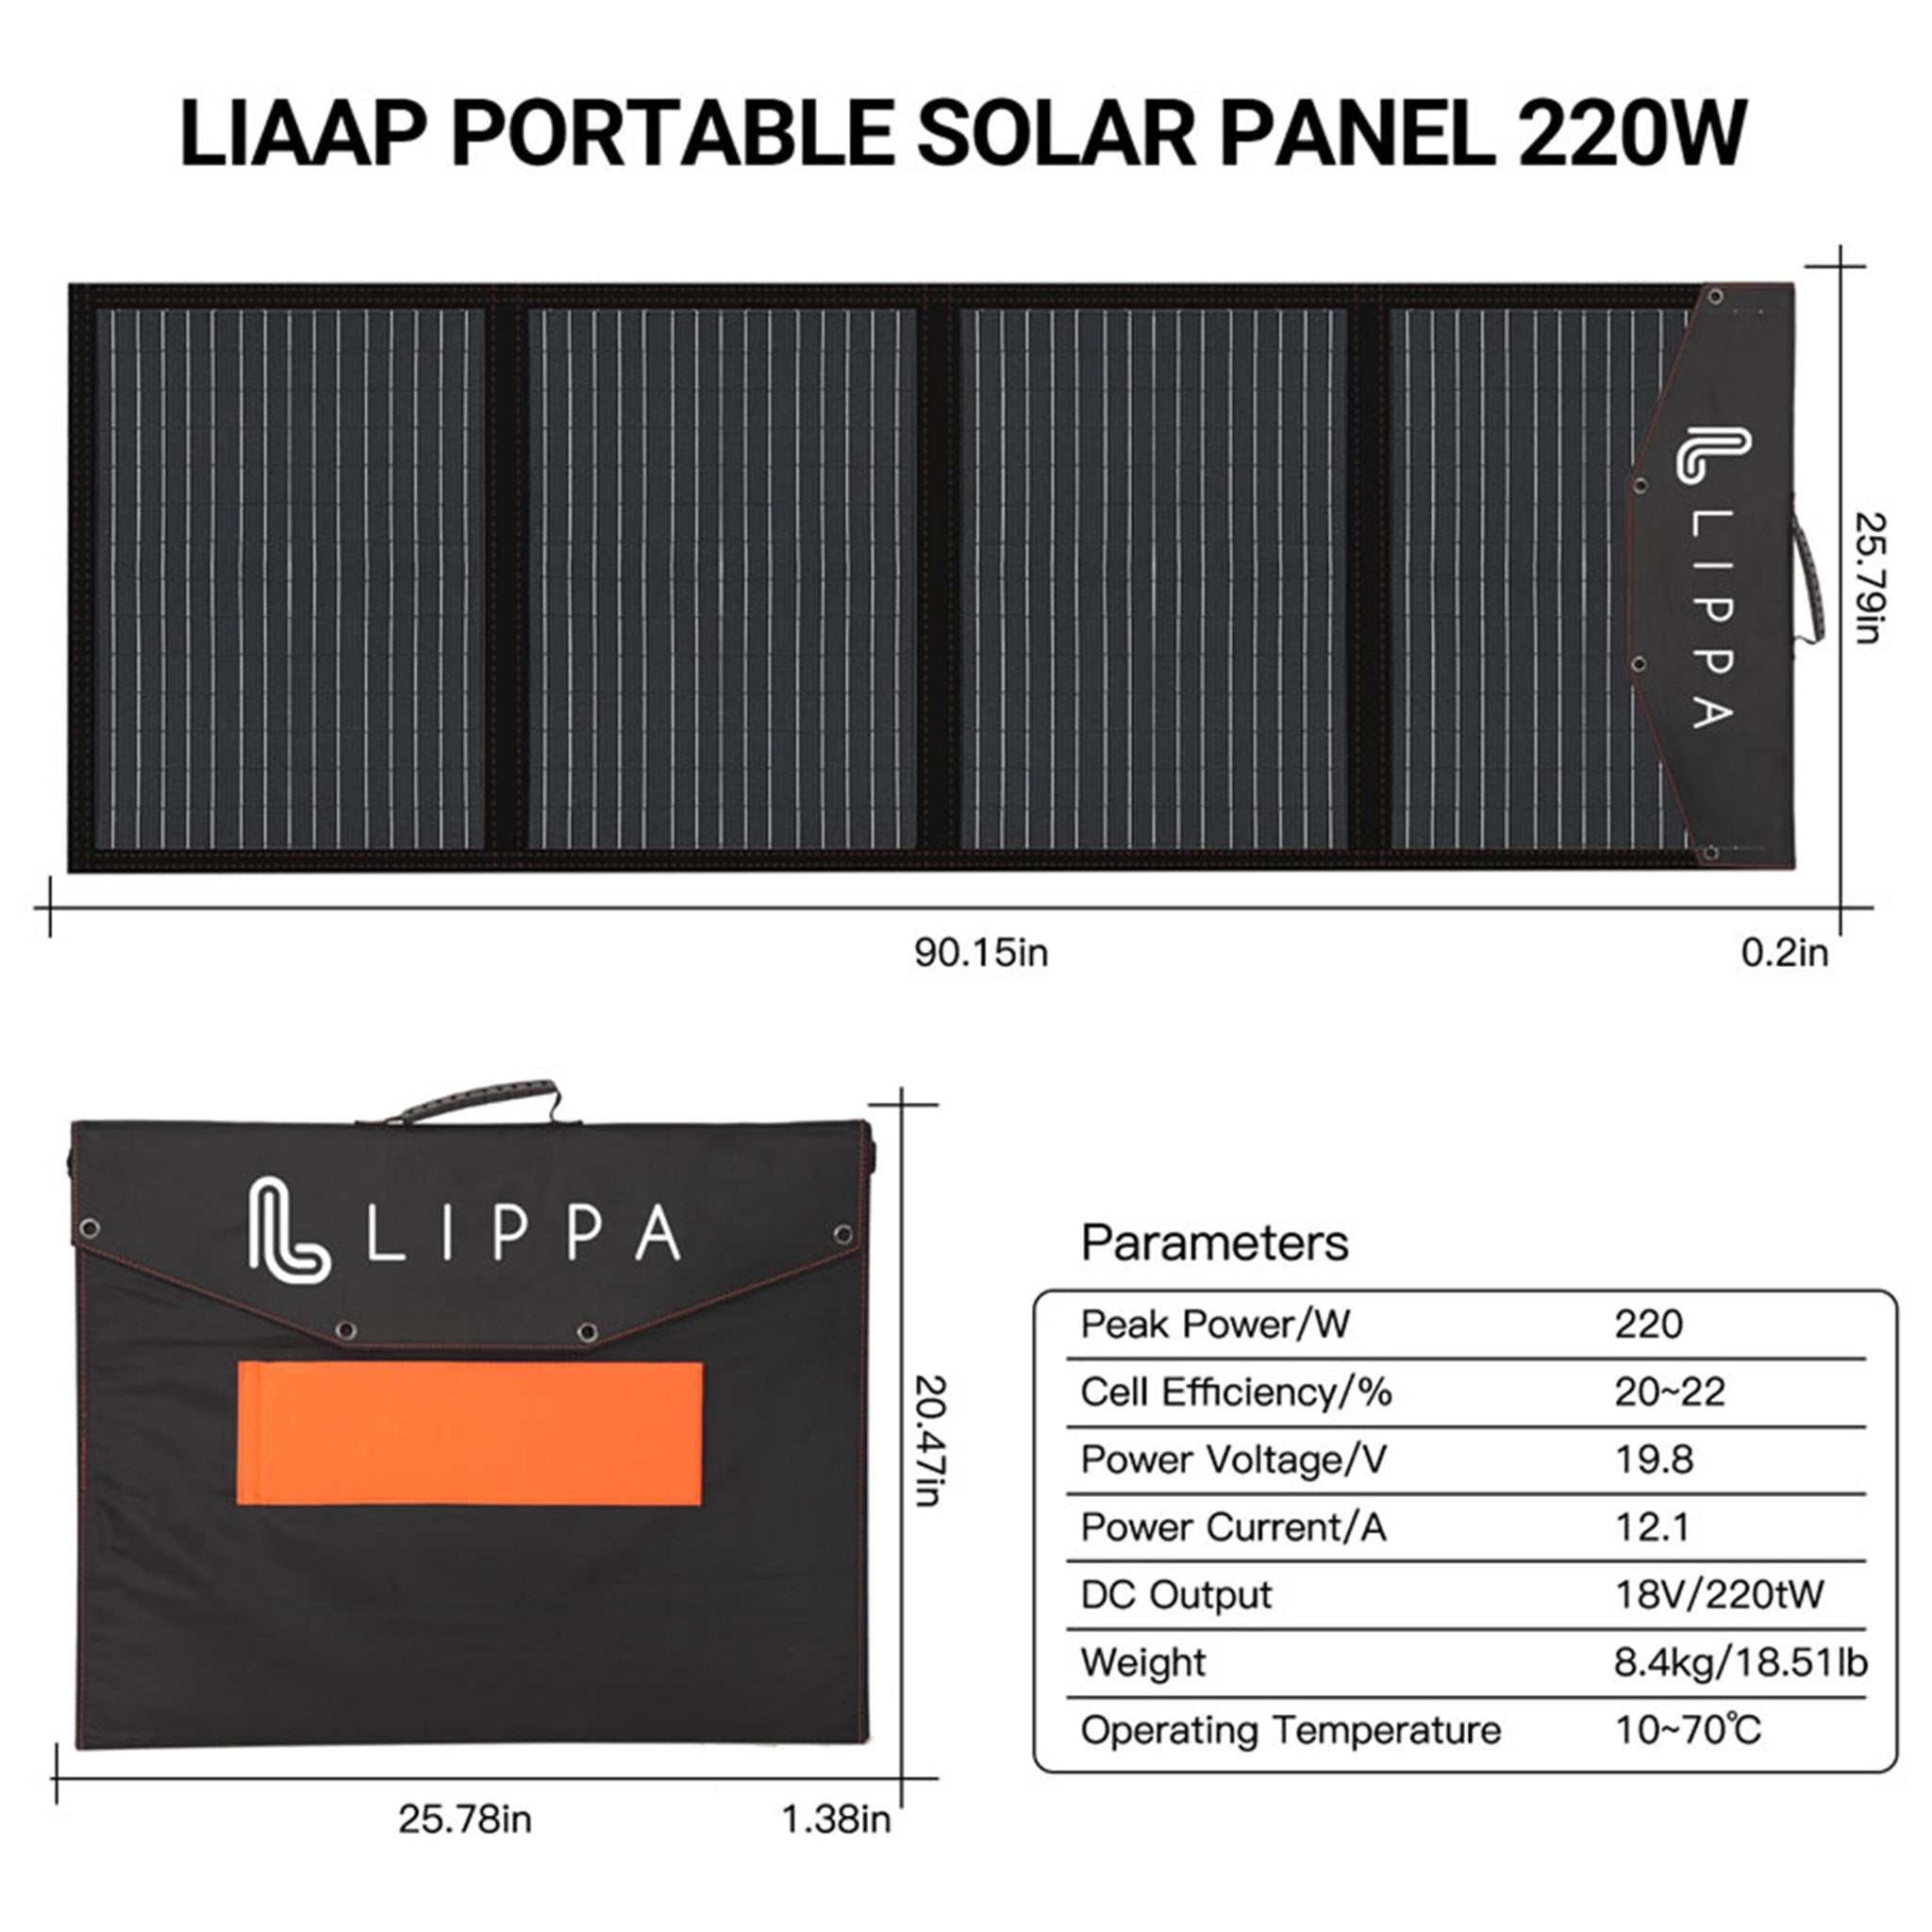 LPSP220 Lippa Solar Panel 220W Black 5 (Can You Change The Name LIAAP)